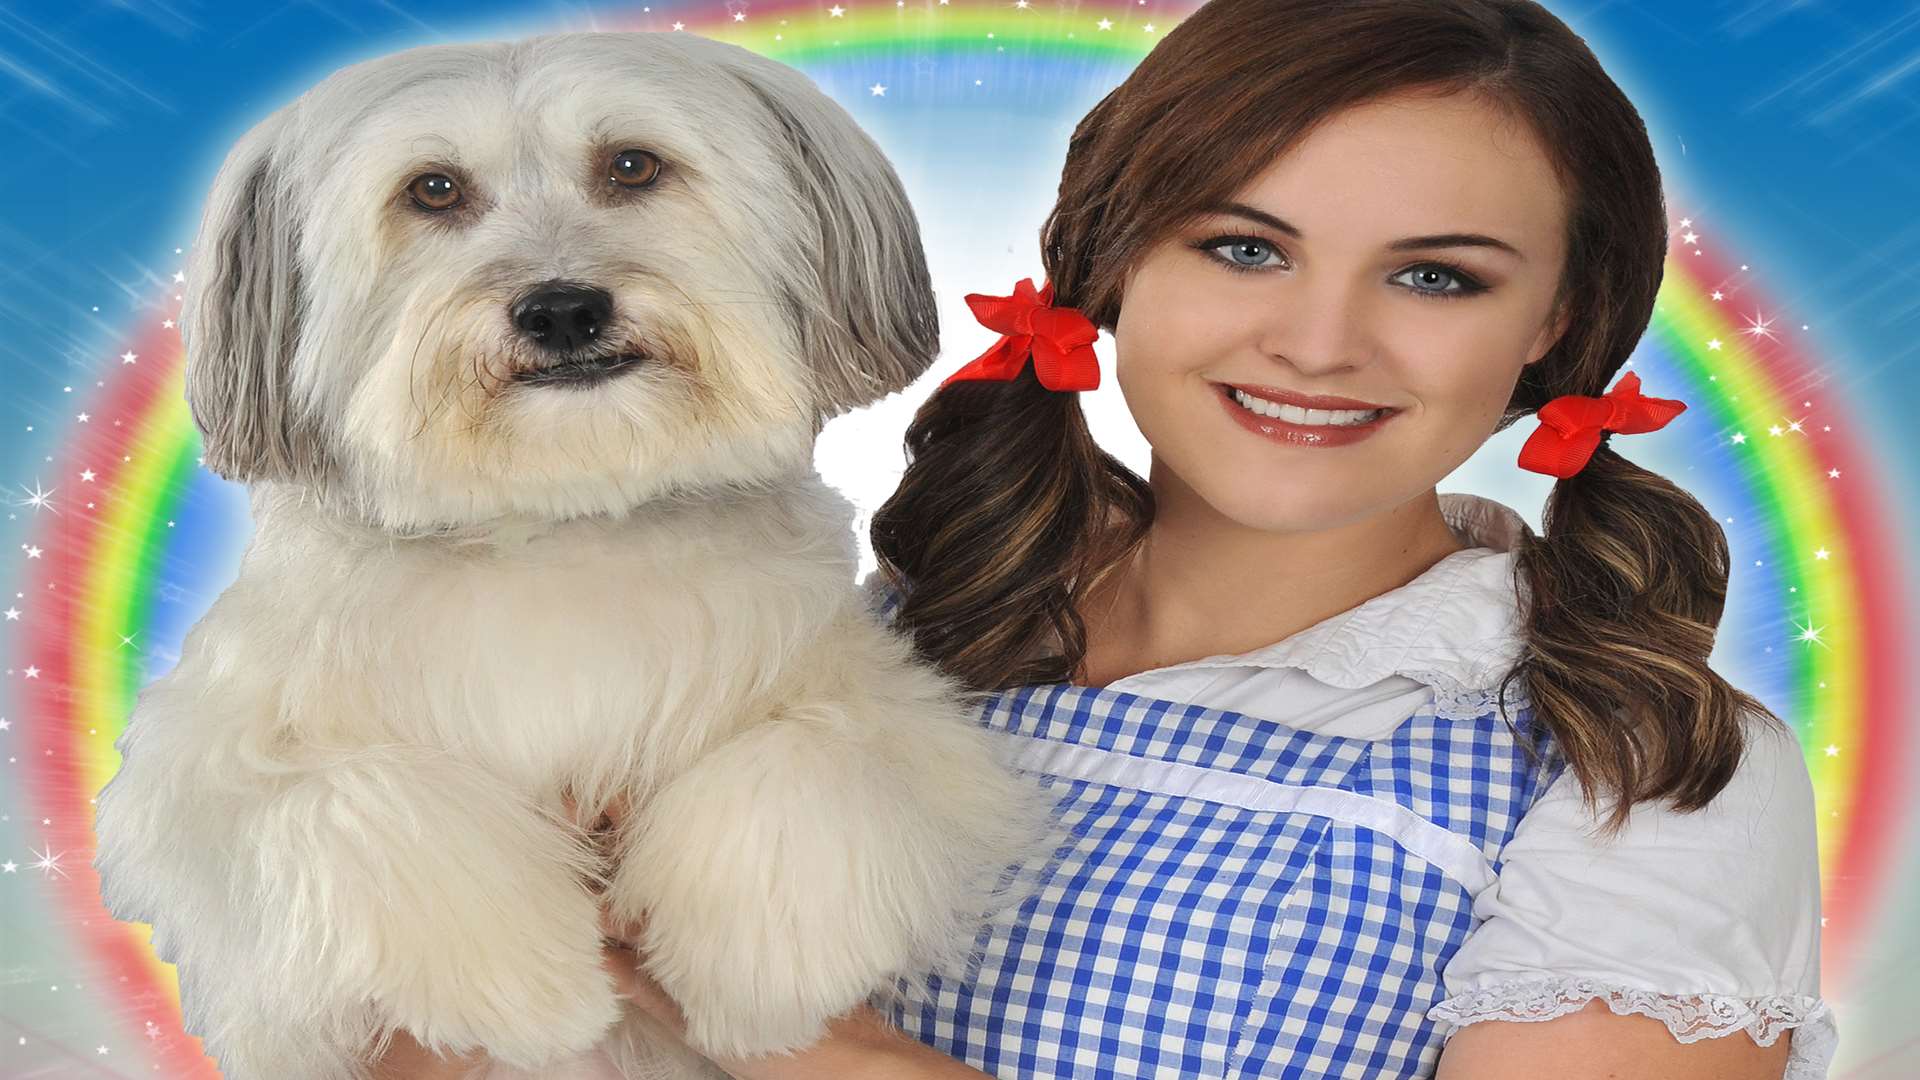 Ashleigh and Pudsey star as Dorothy and Toto in the Wizard of Oz at the Central Theatre, Chatham